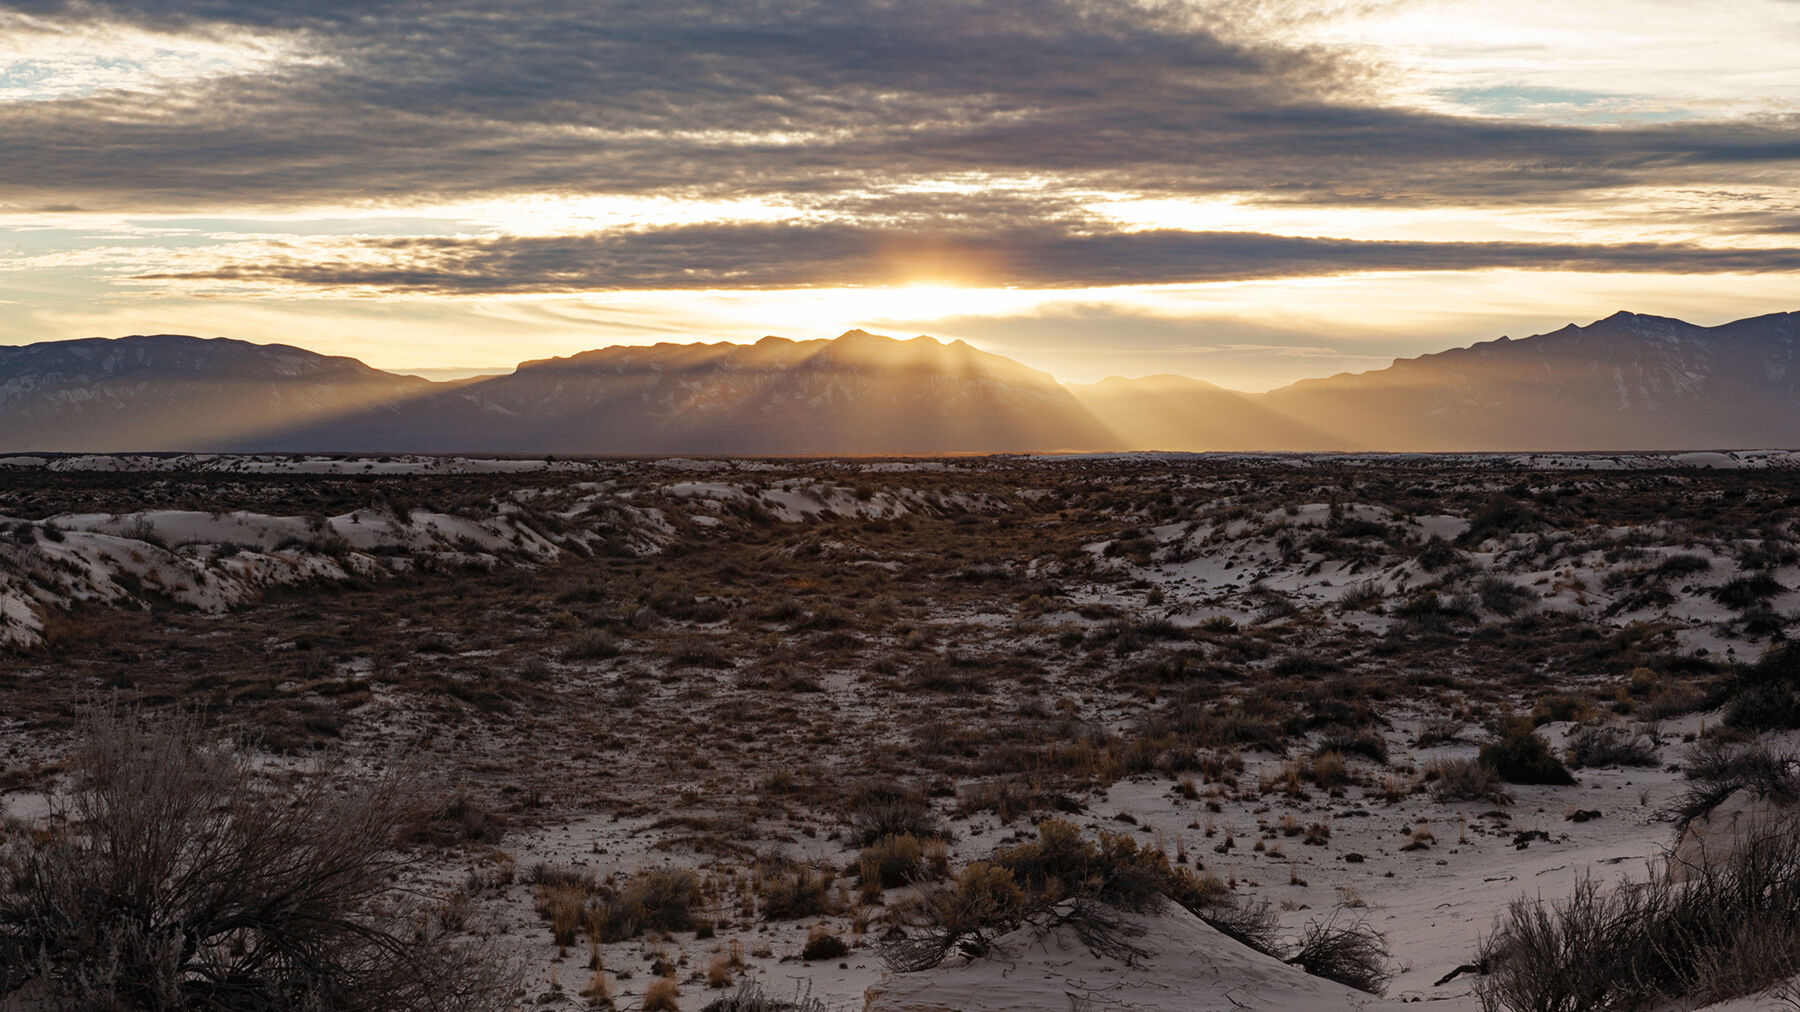 The sun setting over mountains in White Sands National Monument, New Mexico